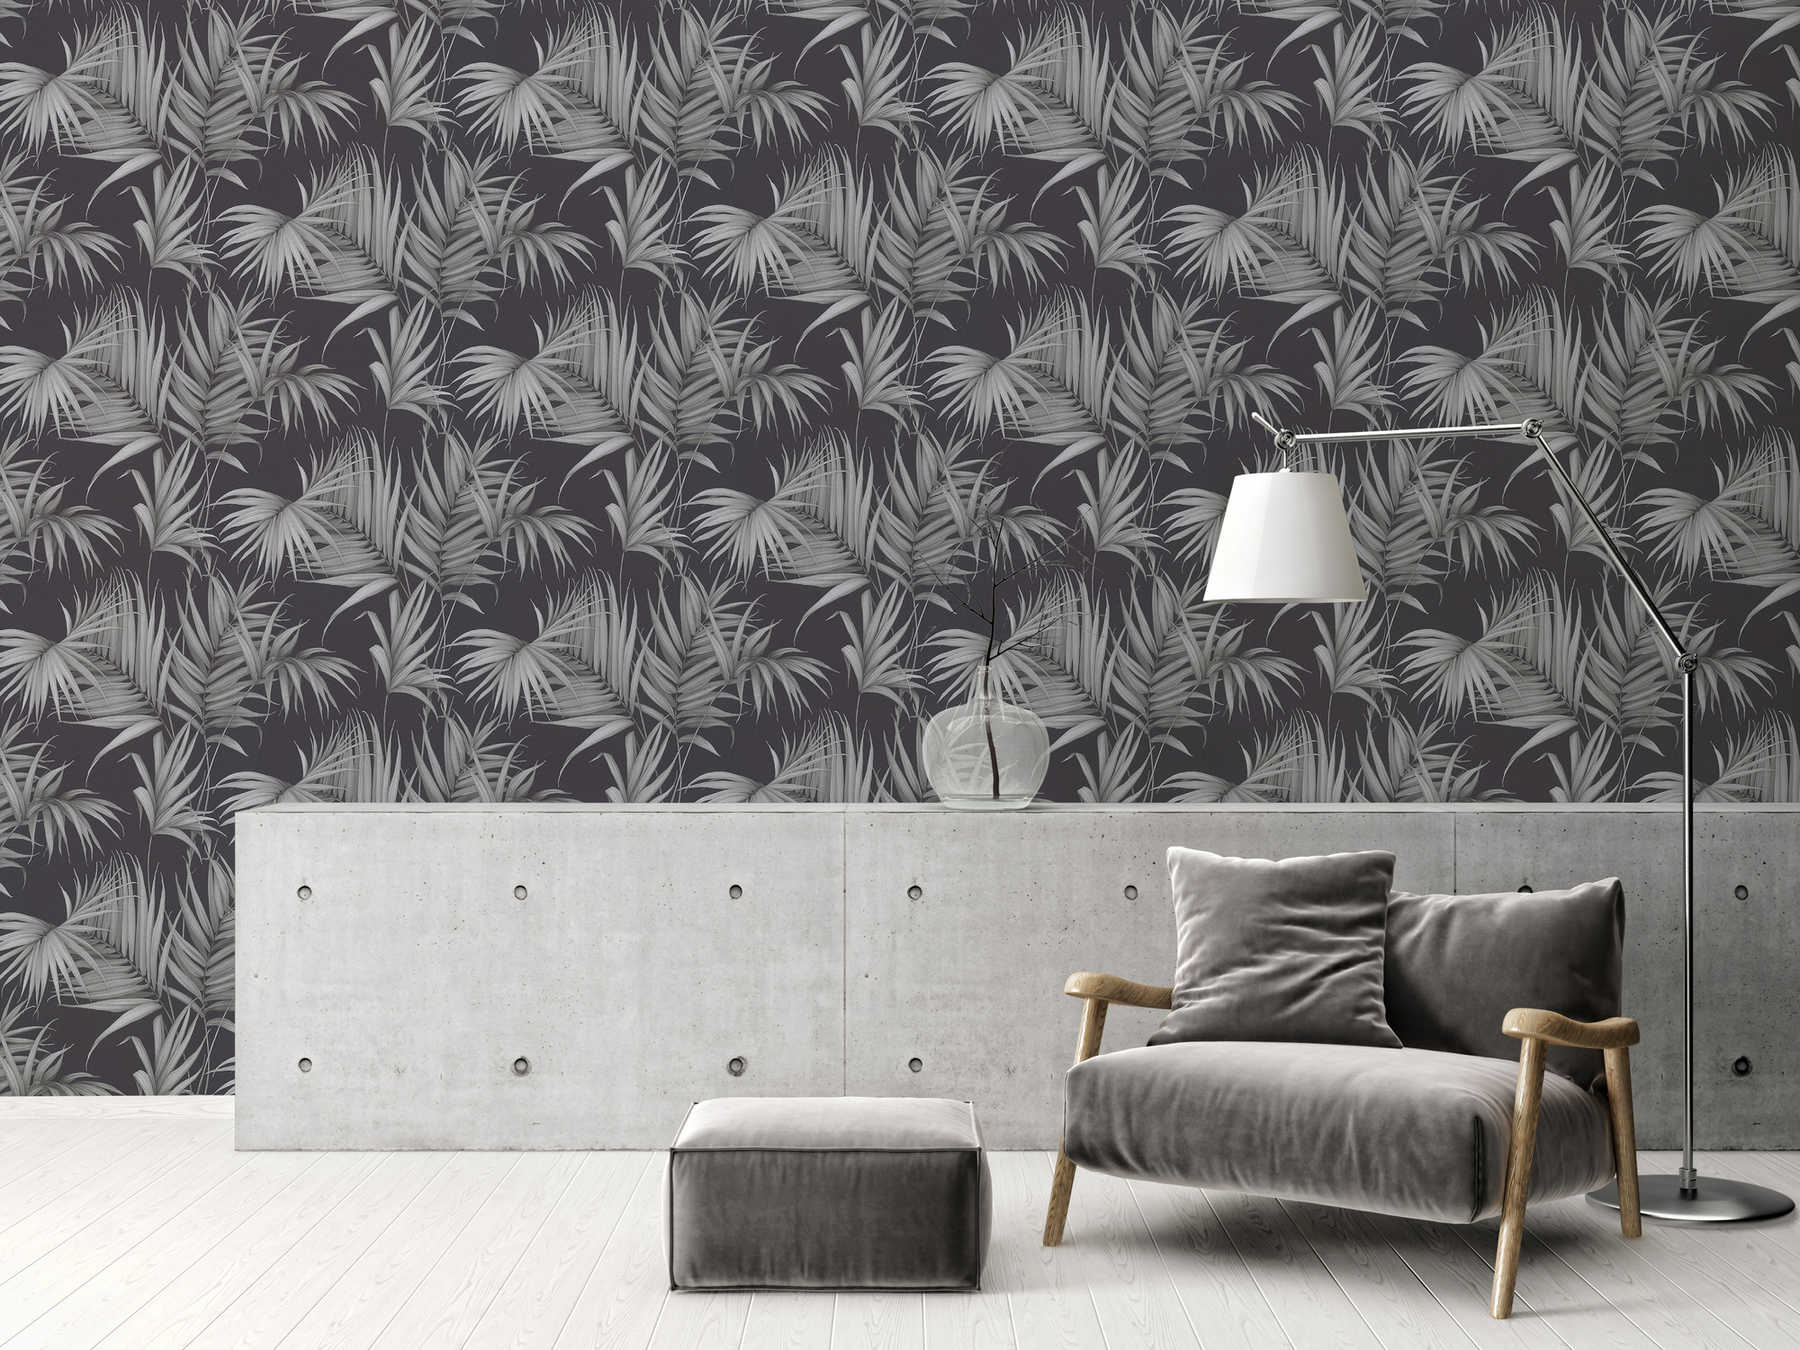             Tropical wallpaper with fern leaves - grey, black
        